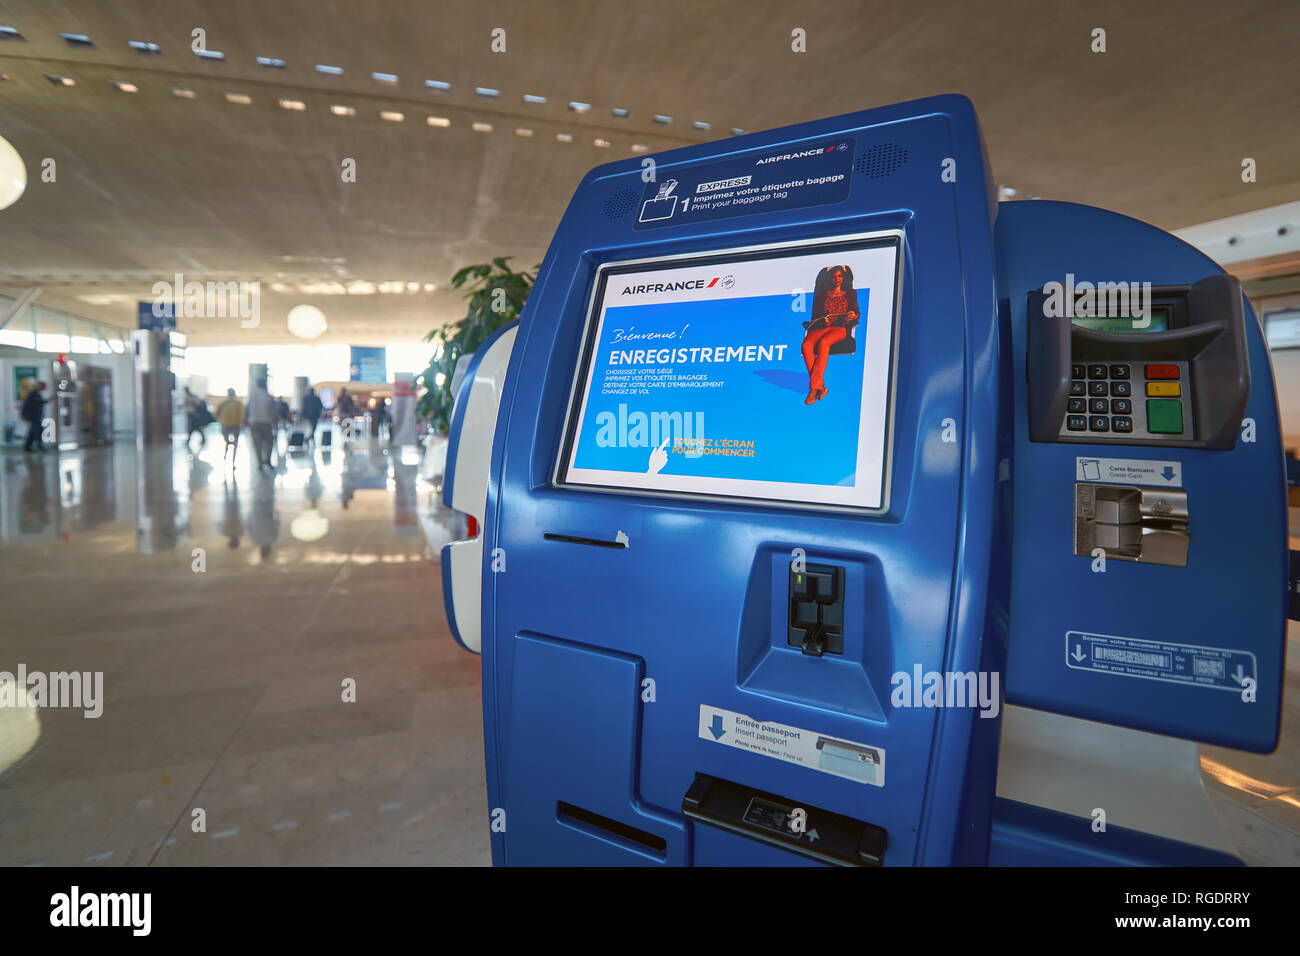 PARIS, FRANCE - CIRCA SEPTEMBER, 2014: inside Charles de Gaulle Airport. The airport is the largest international airport in France. Stock Photo